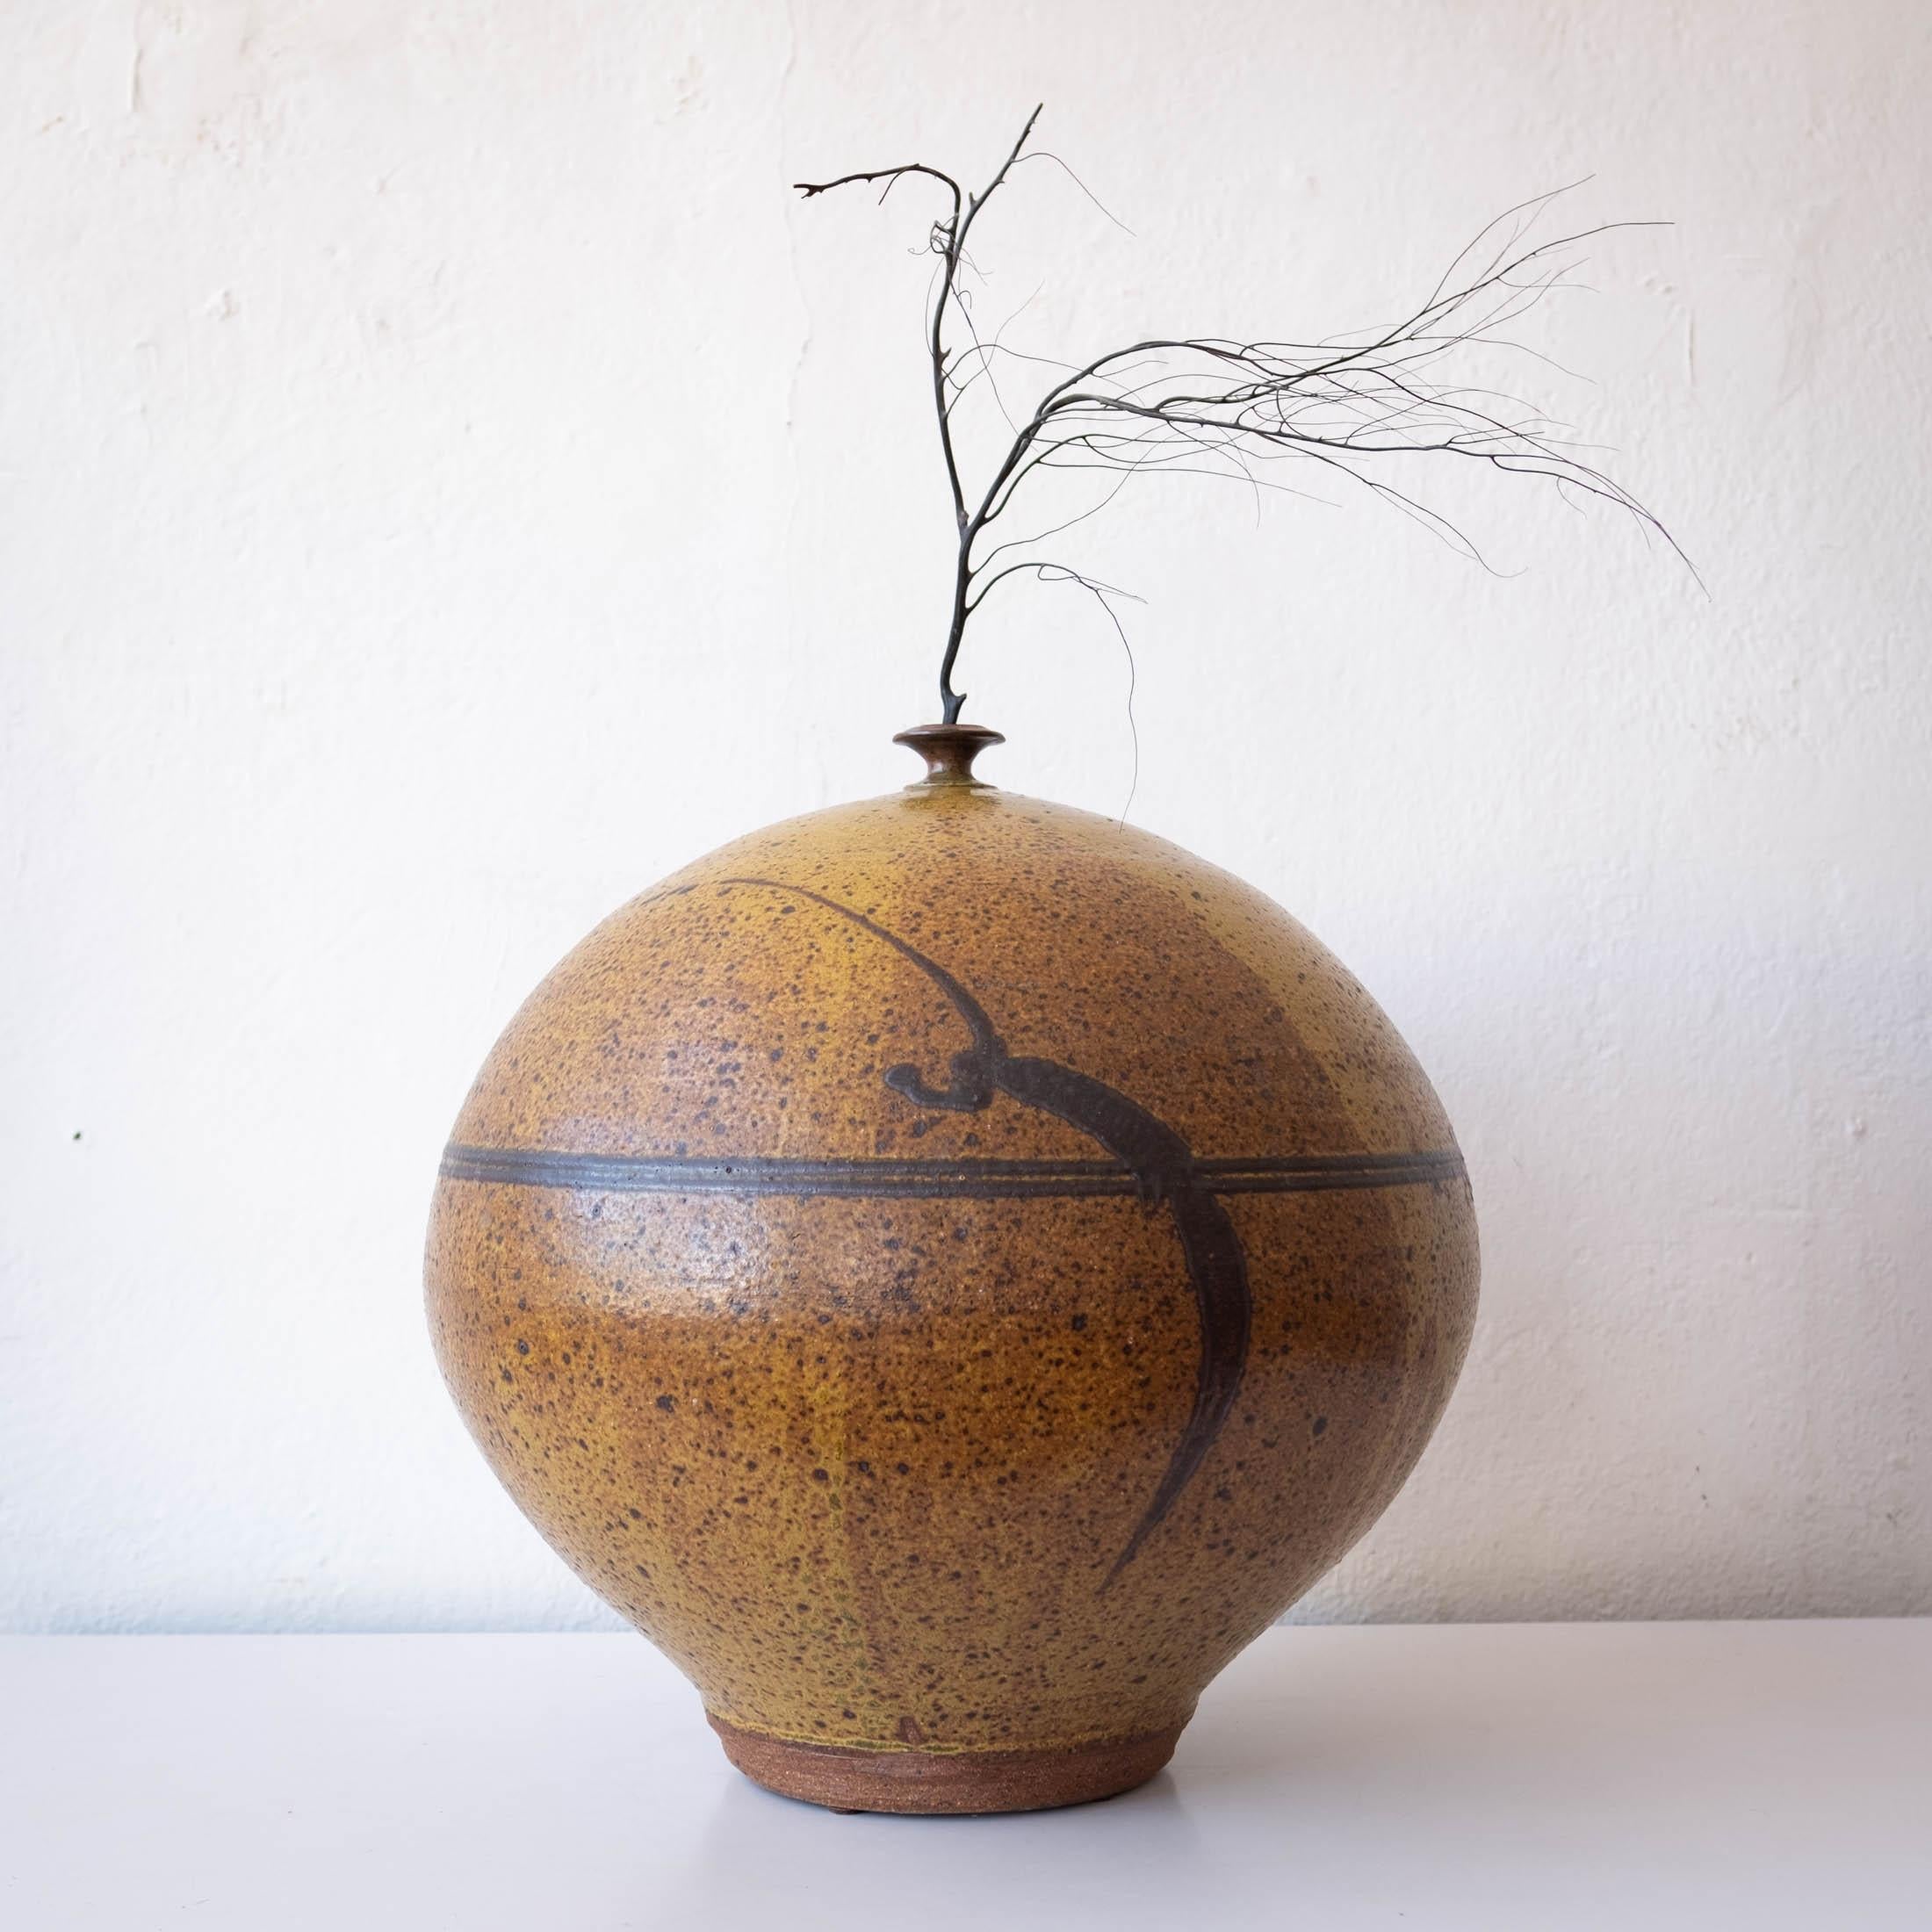 Large studio ceramic weed pot by northwest artist Jerry Glenn. Based in Portland, Oregon Glenn studied under Ray Grimm. This wheel-thrown piece has both an incredible glaze and form. Calligraphy brush decoration depicting a rope wrapped around the